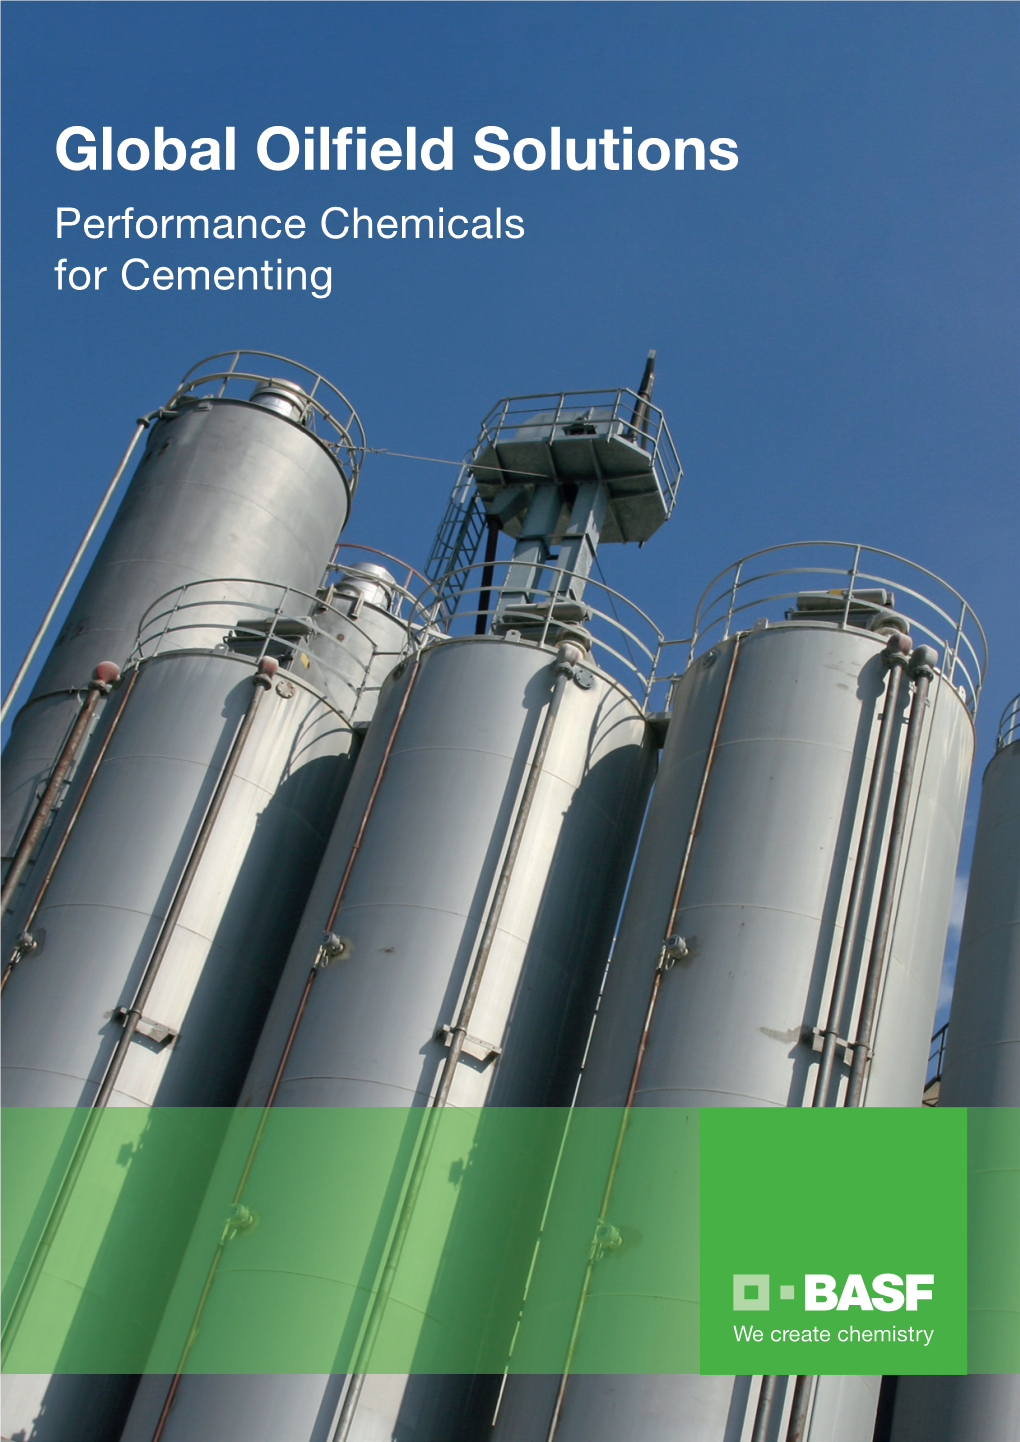 Performance Chemicals for Cementing